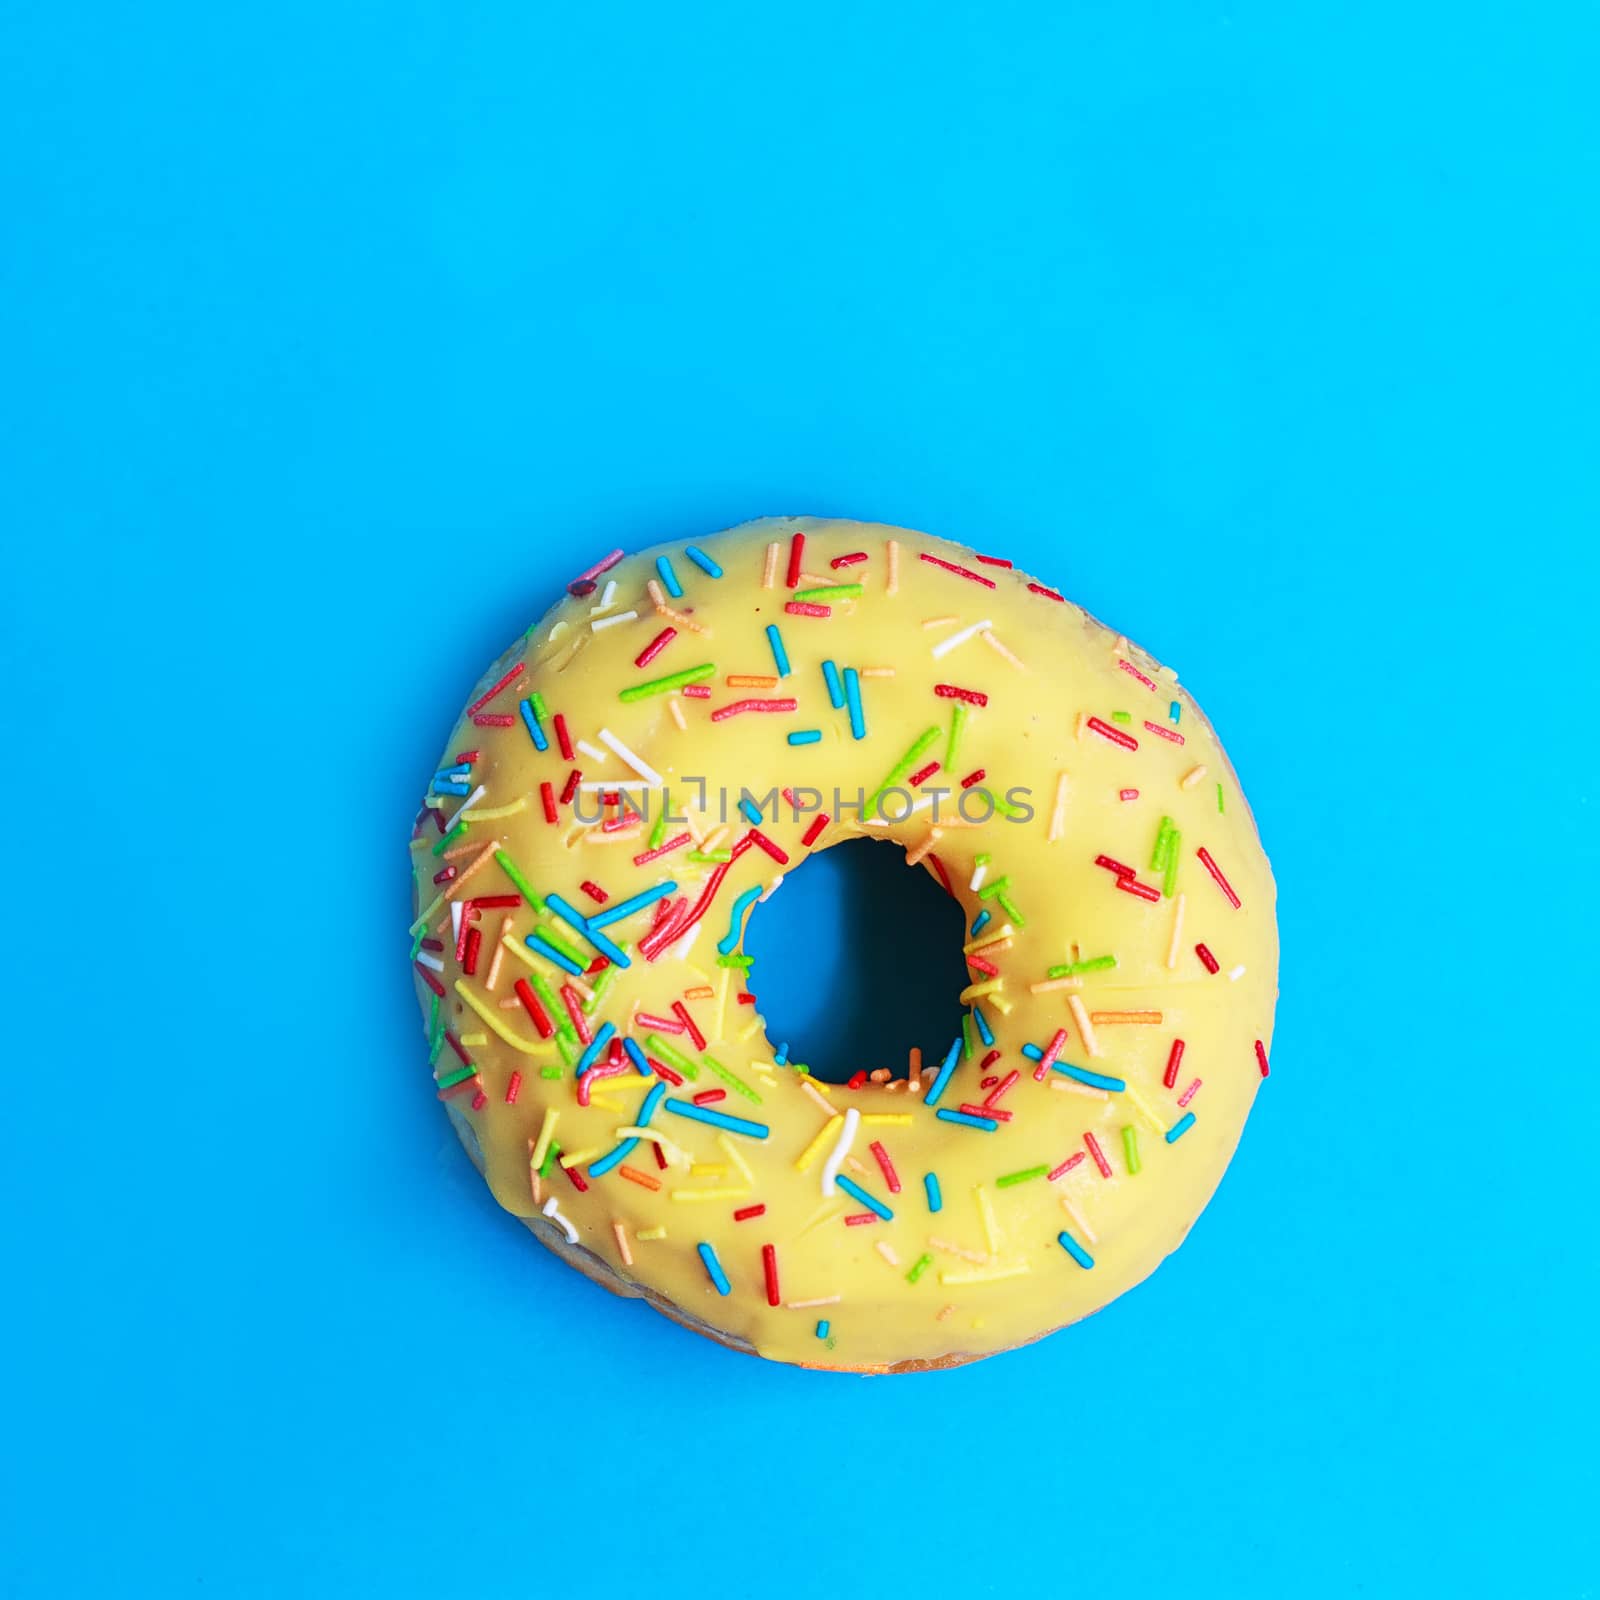 Bright yellow round Donuts with colorful sprinkles on a blue background